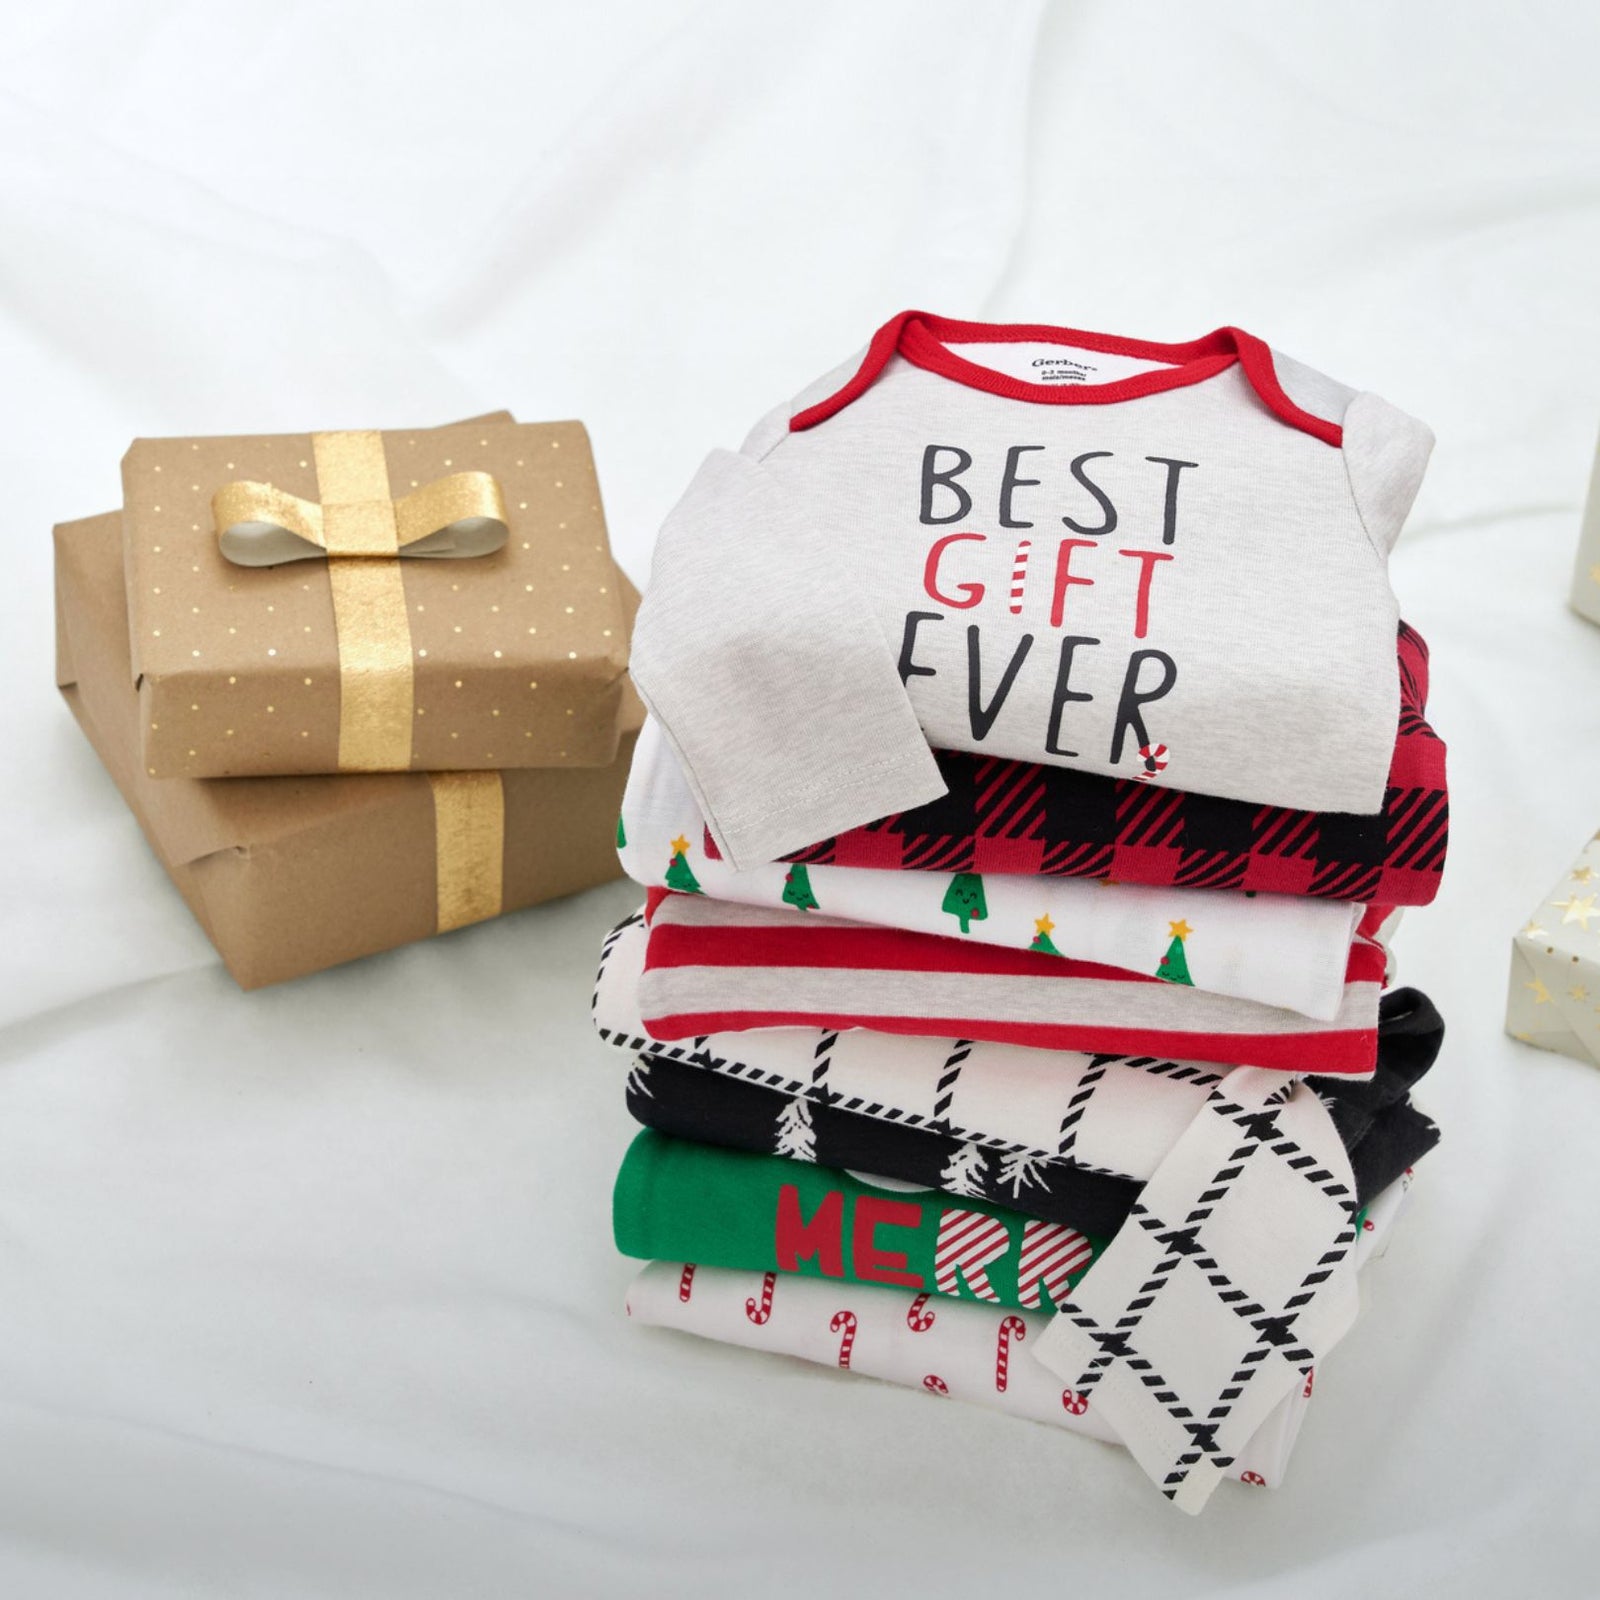 A stack of beautifully wrapped Christmas presents adorned with the words "Best Gift Ever" in festive typography.